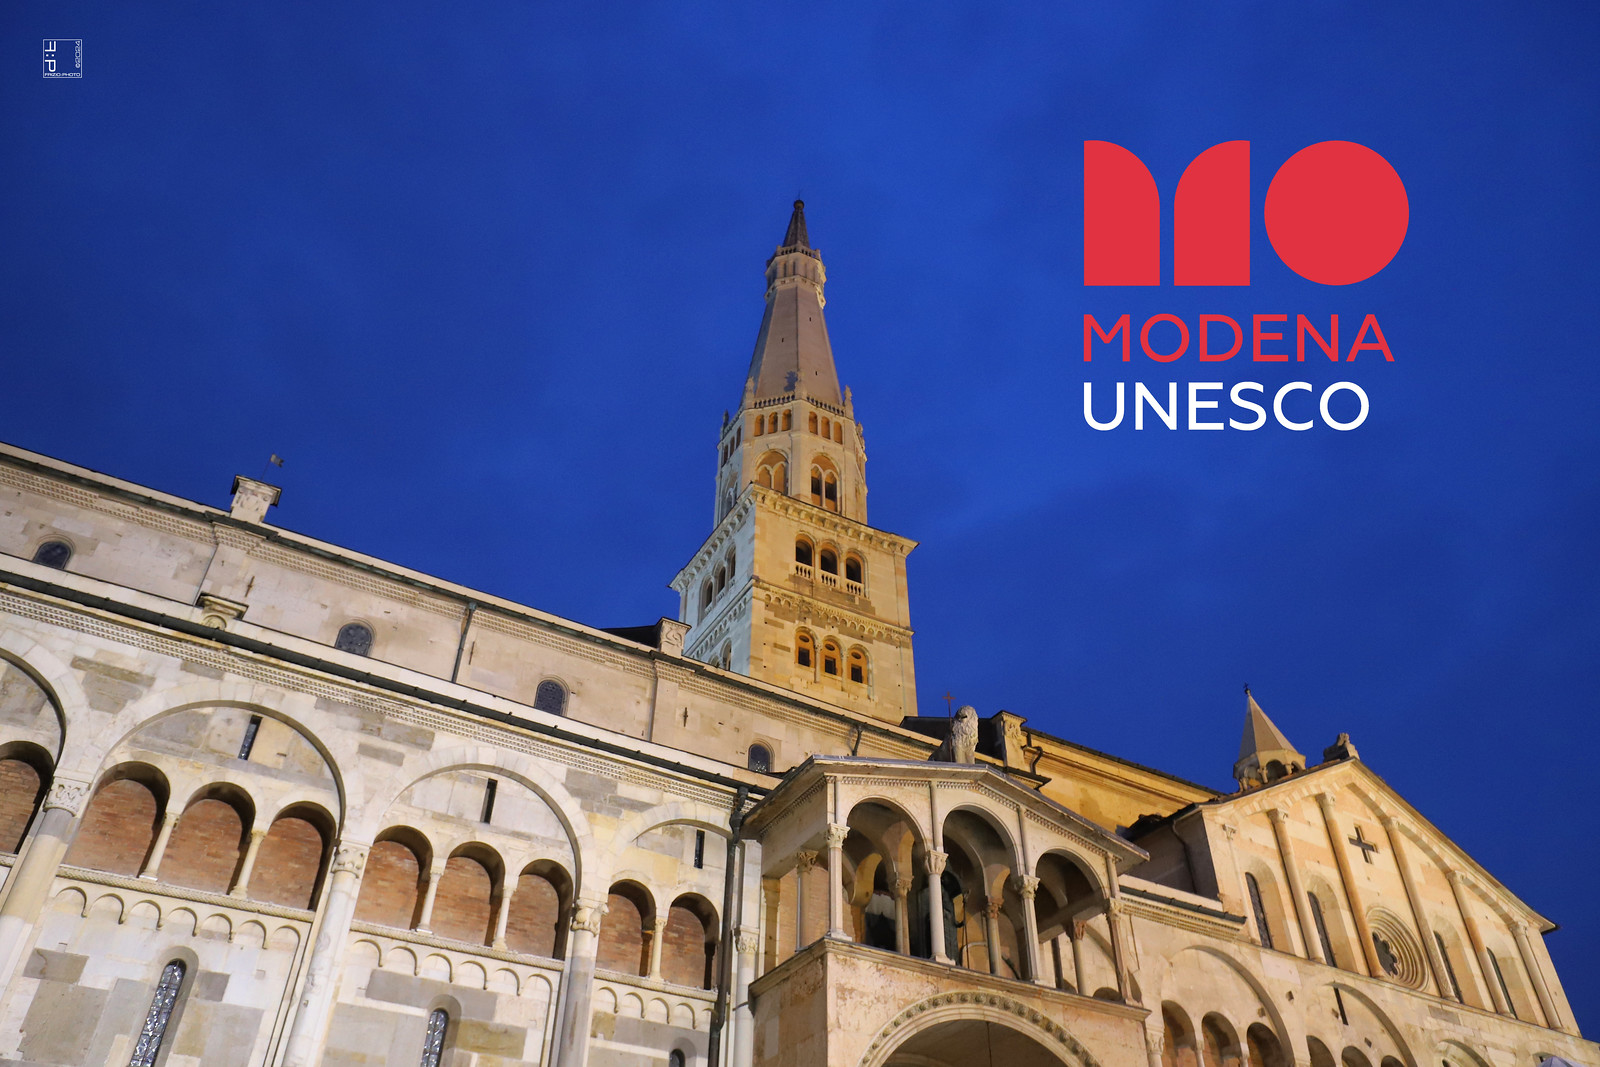 #a0578 Modena, Piazza grande by night, with UNESCO logo